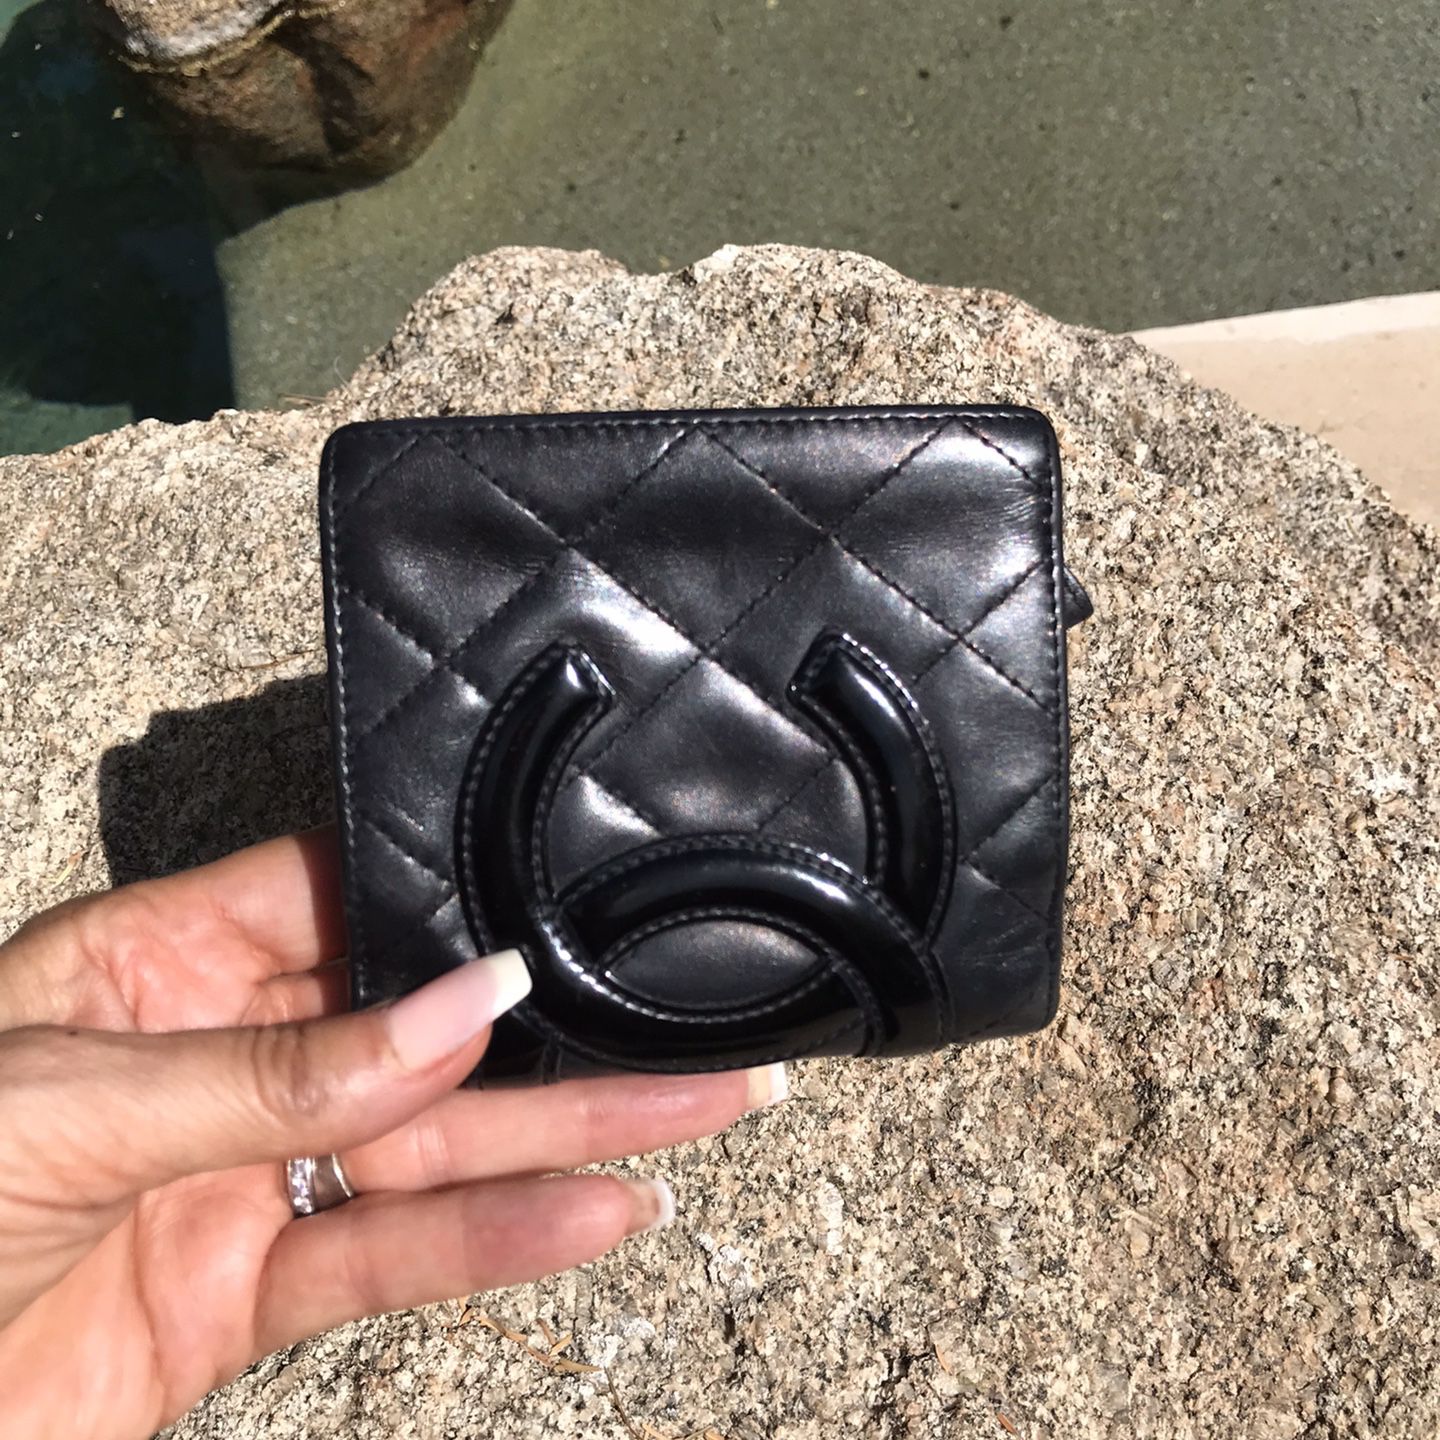 Chanel Cambon Black And Pink Wallet for Sale in Costa Mesa, CA - OfferUp